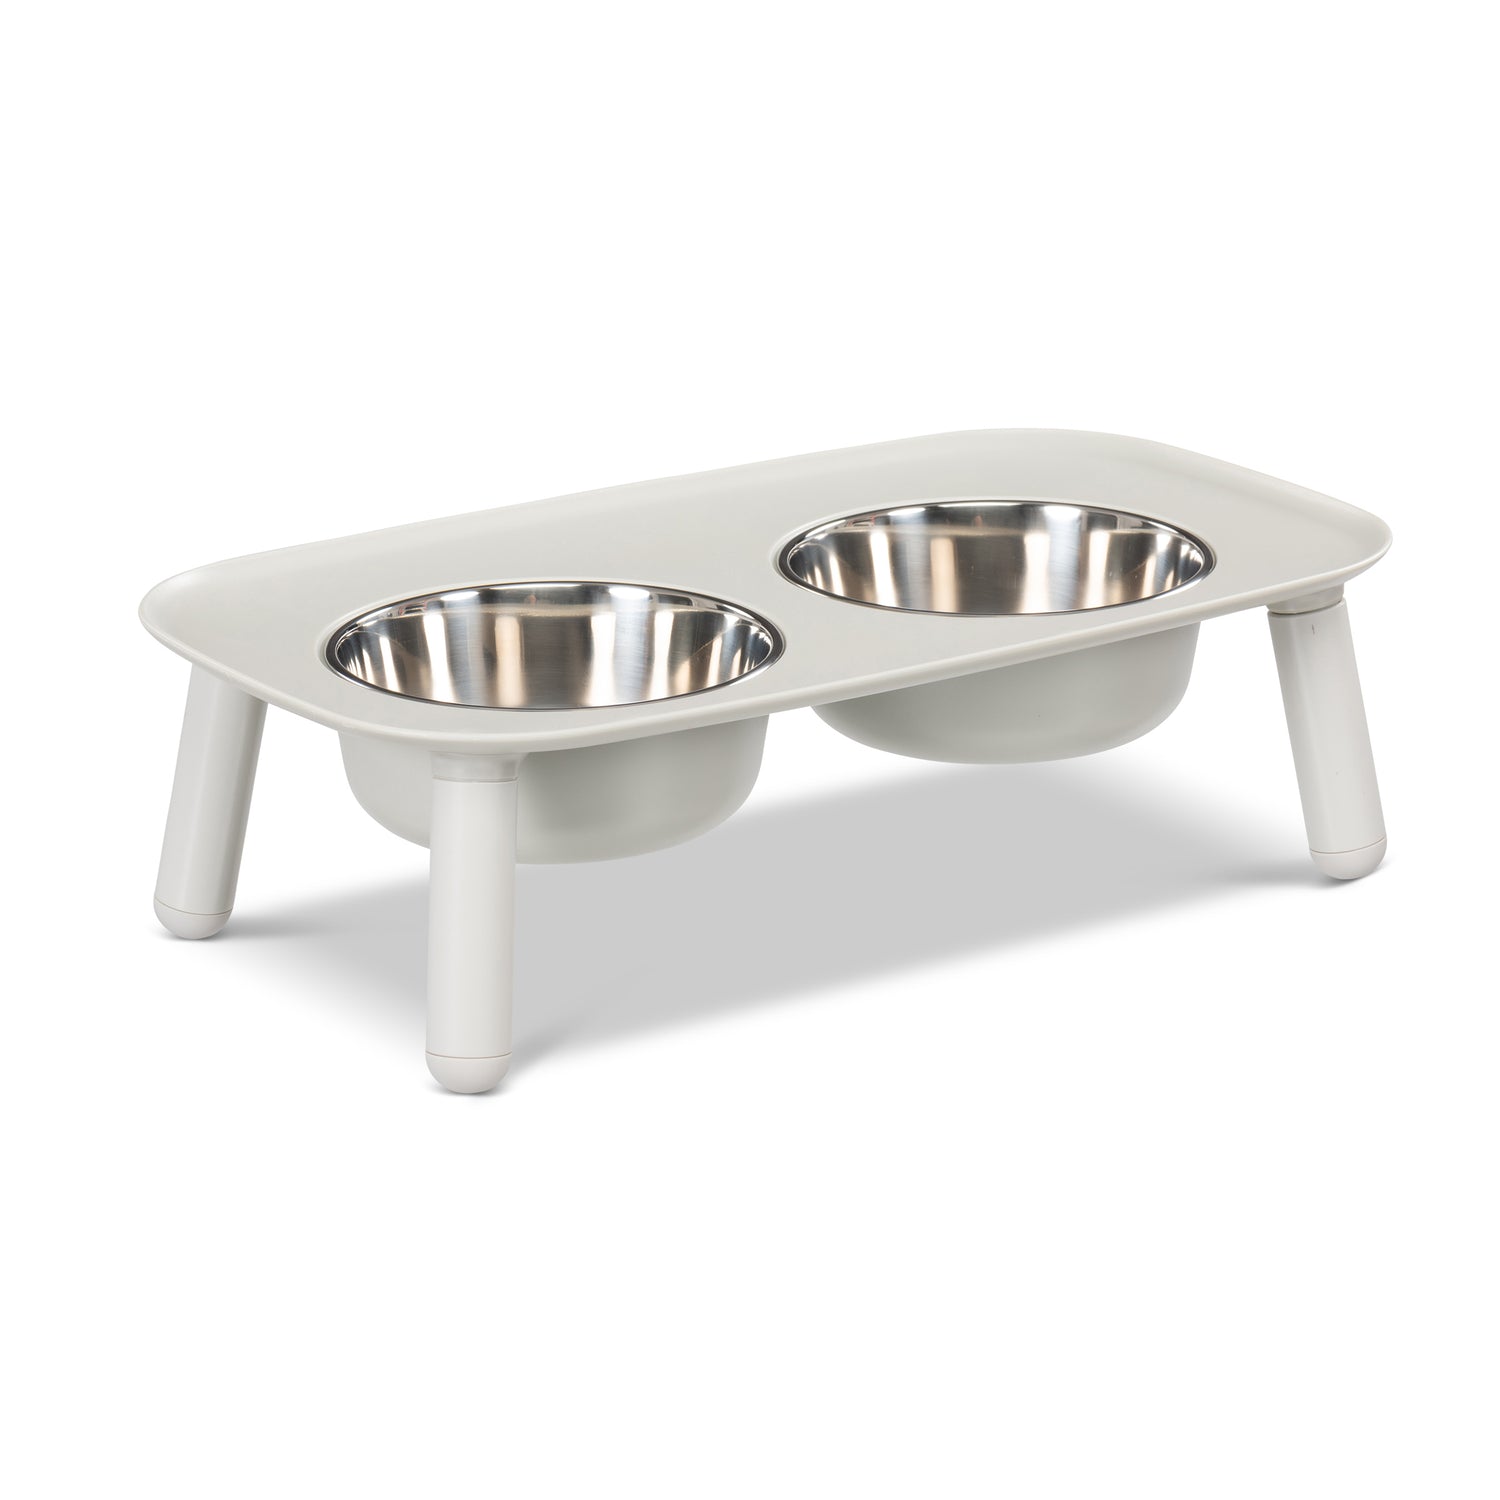 Light grey elevated double dog diner with 5 inch legs.